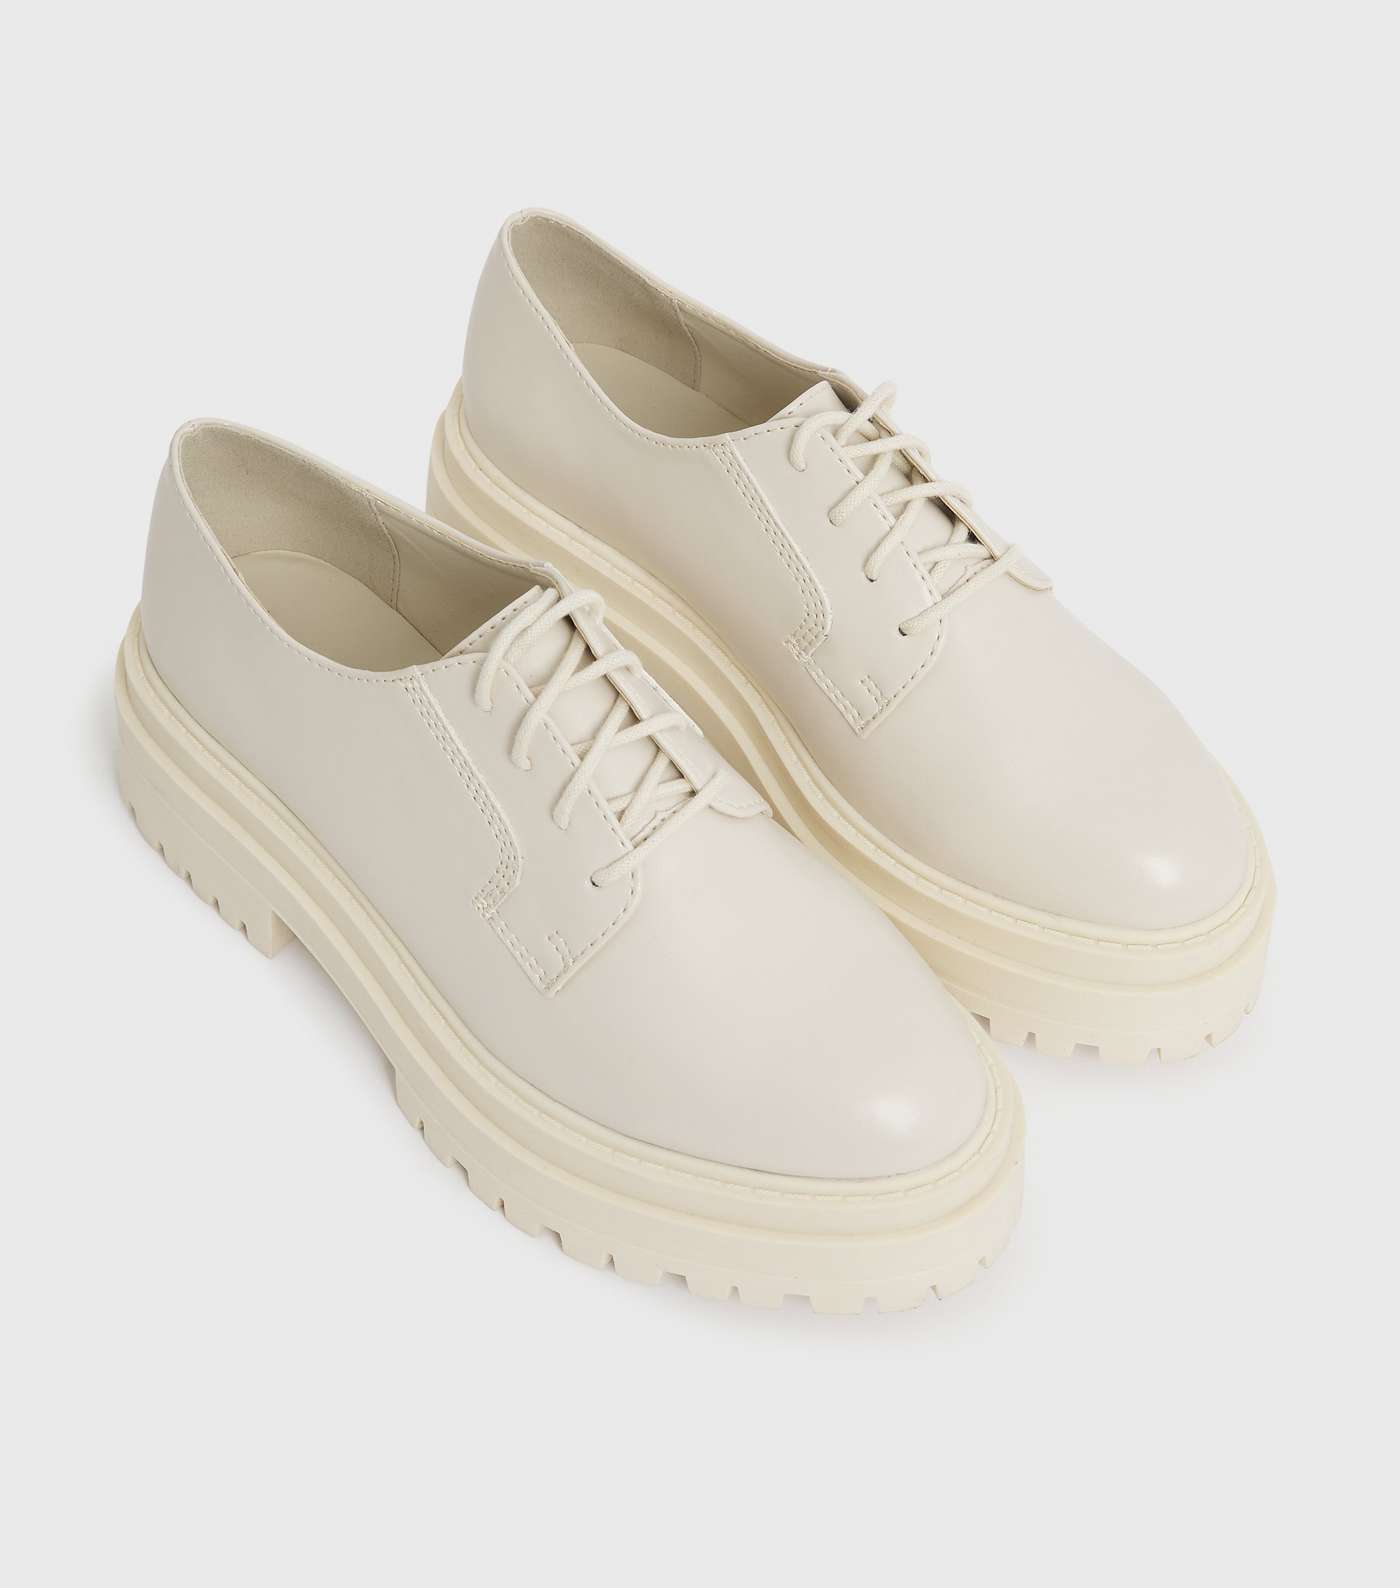 Off White Chunky Cleated Lace Up Brogues Image 3